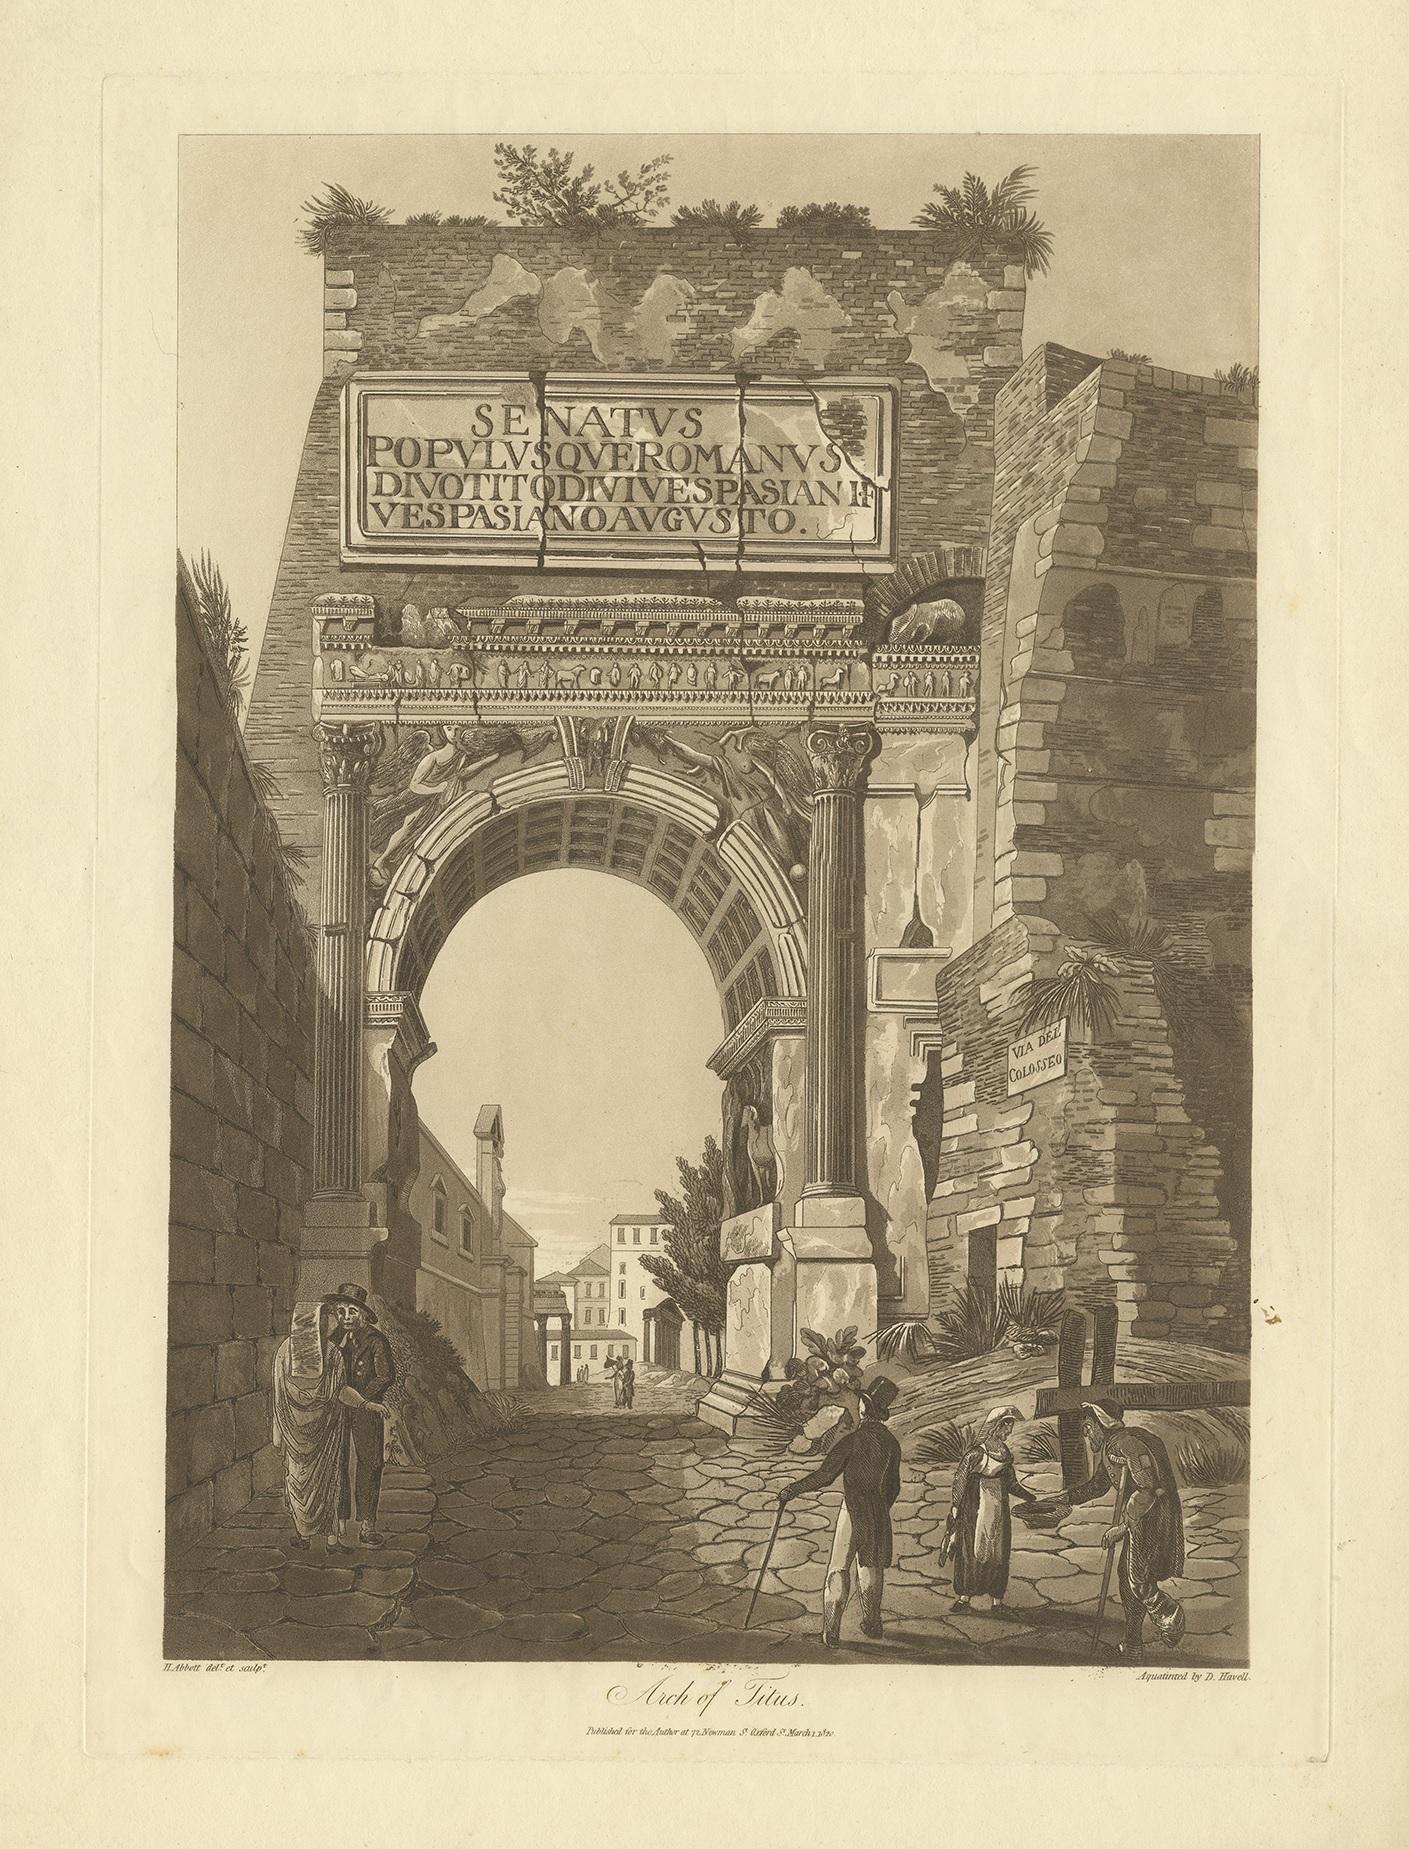 Antique print titled 'Arch of Titus'. Large aquatint of the Arch of Titus'. The Arch of Titus is a 1st century AD honorific arch, located on the Via Sacra, Rome, just to the south-east of the Roman Forum. It was constructed in c. 81 AD by the